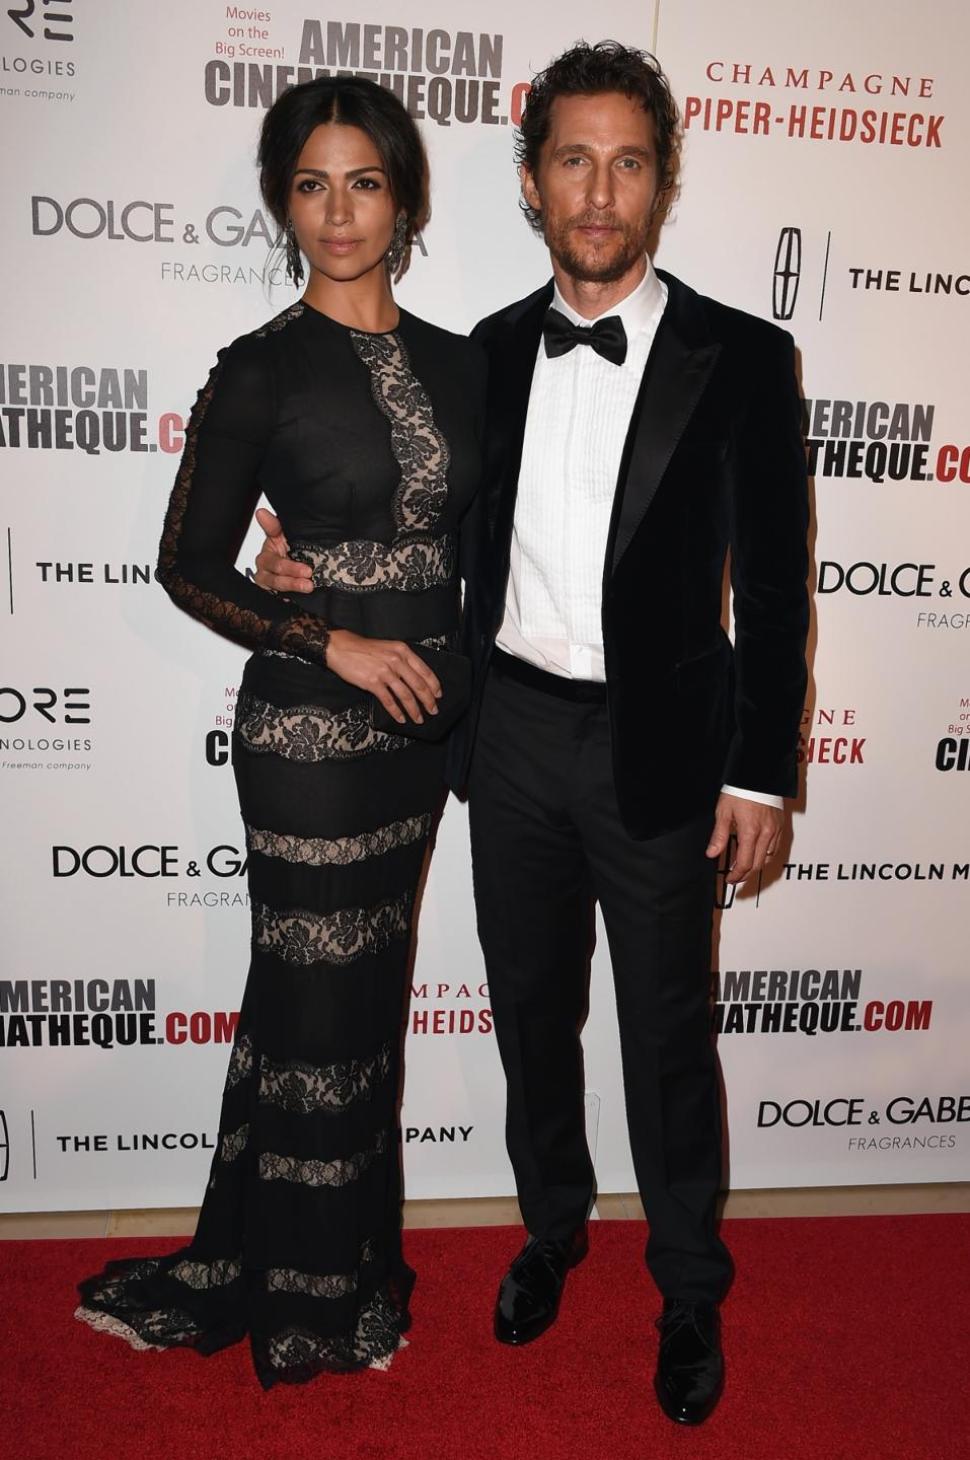 Camila Alves and Matthew McConaughey at the American Cinematheque Awards last week in Beverly Hills